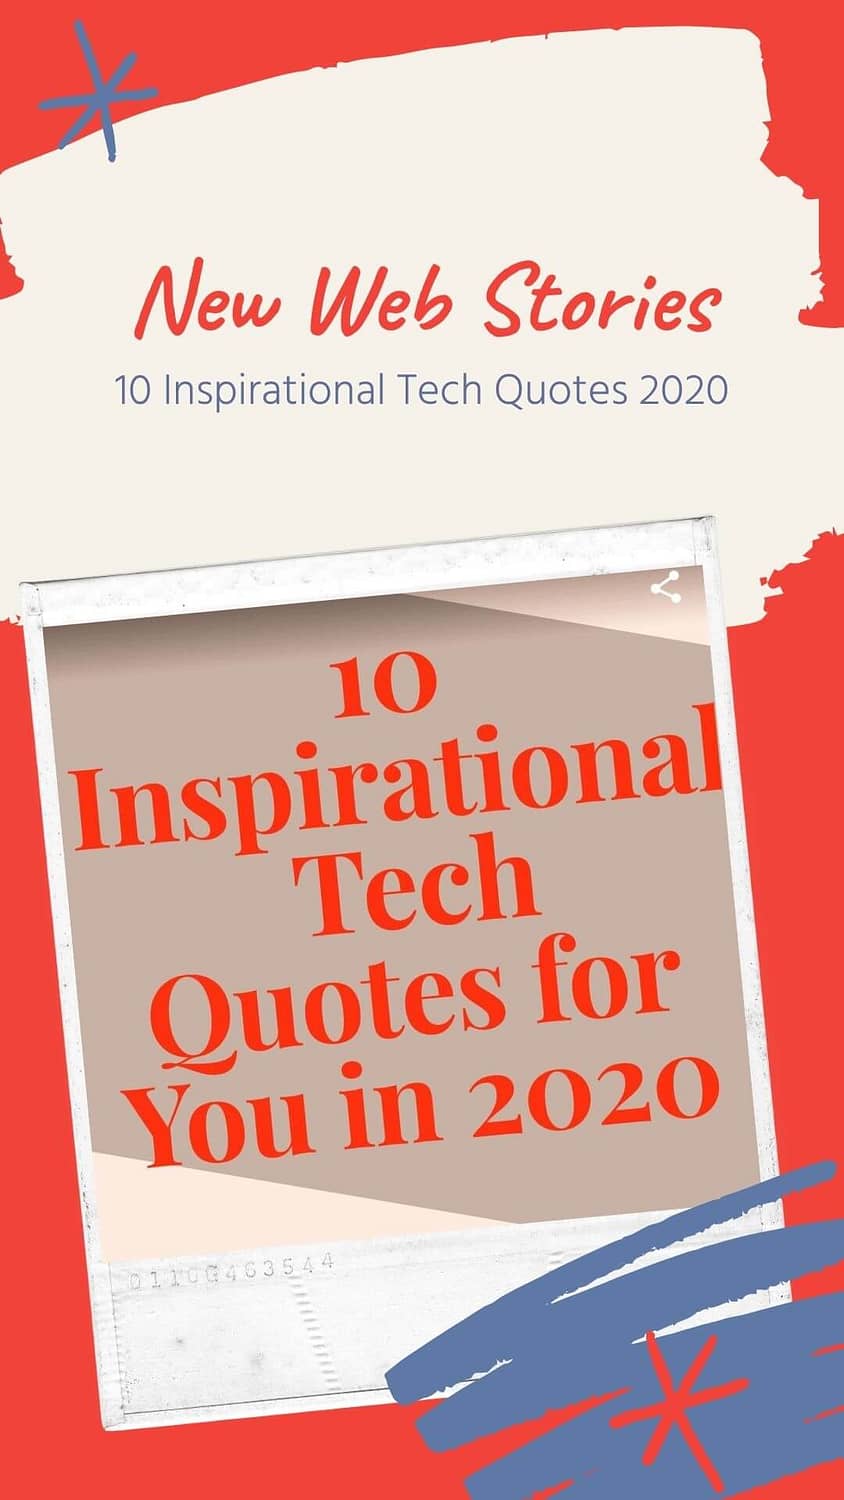 10 Inspirational Tech Quotes for you in 2020 - Web Stories